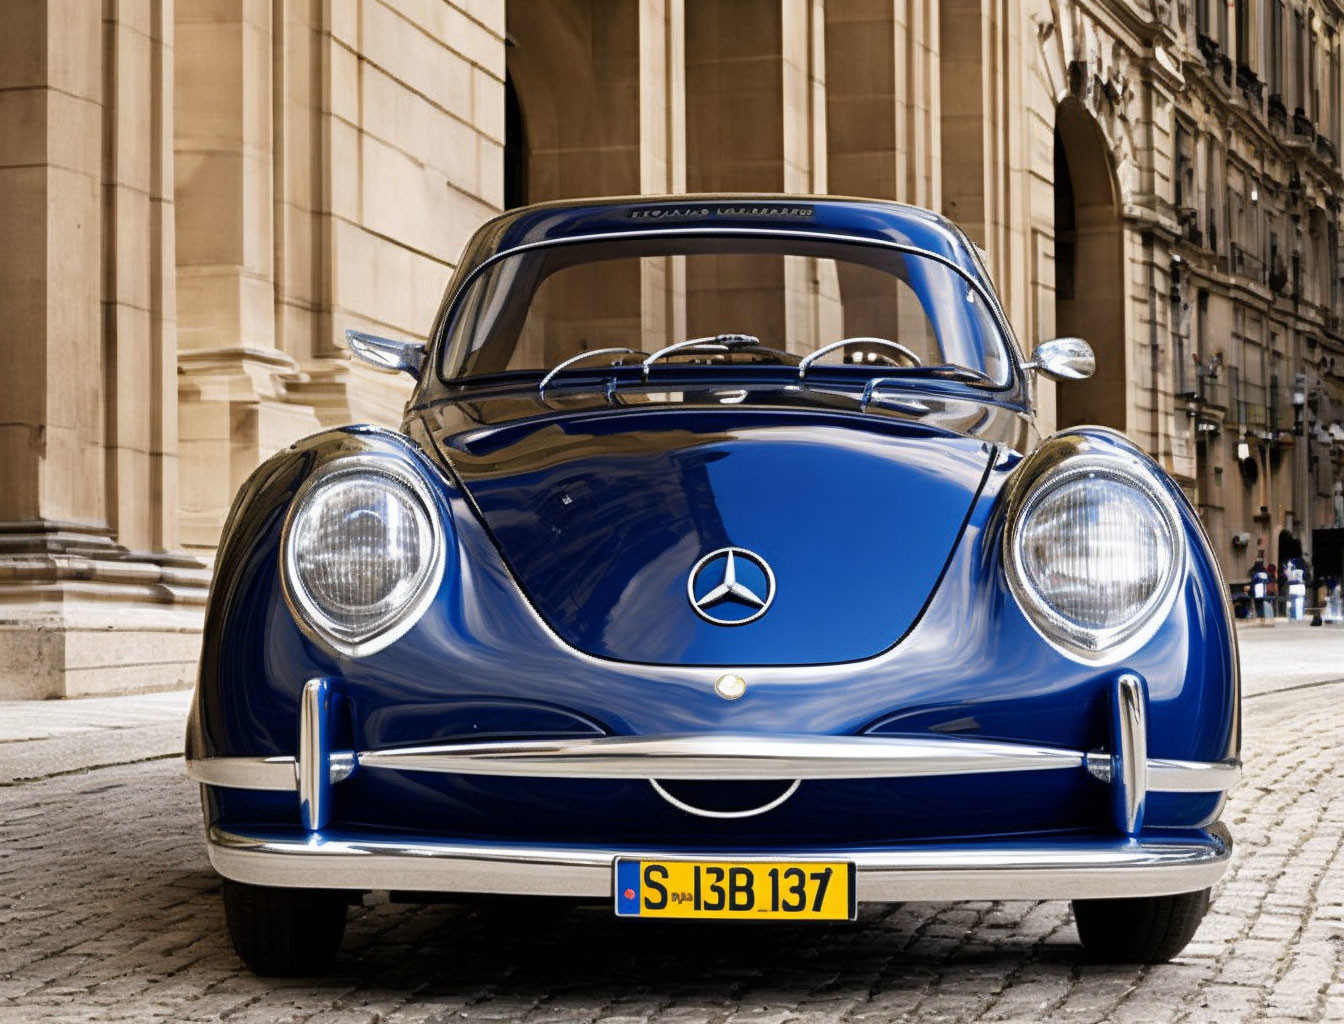 Vintage Blue Mercedes-Benz Parked on Cobbled Street with Classic Architecture